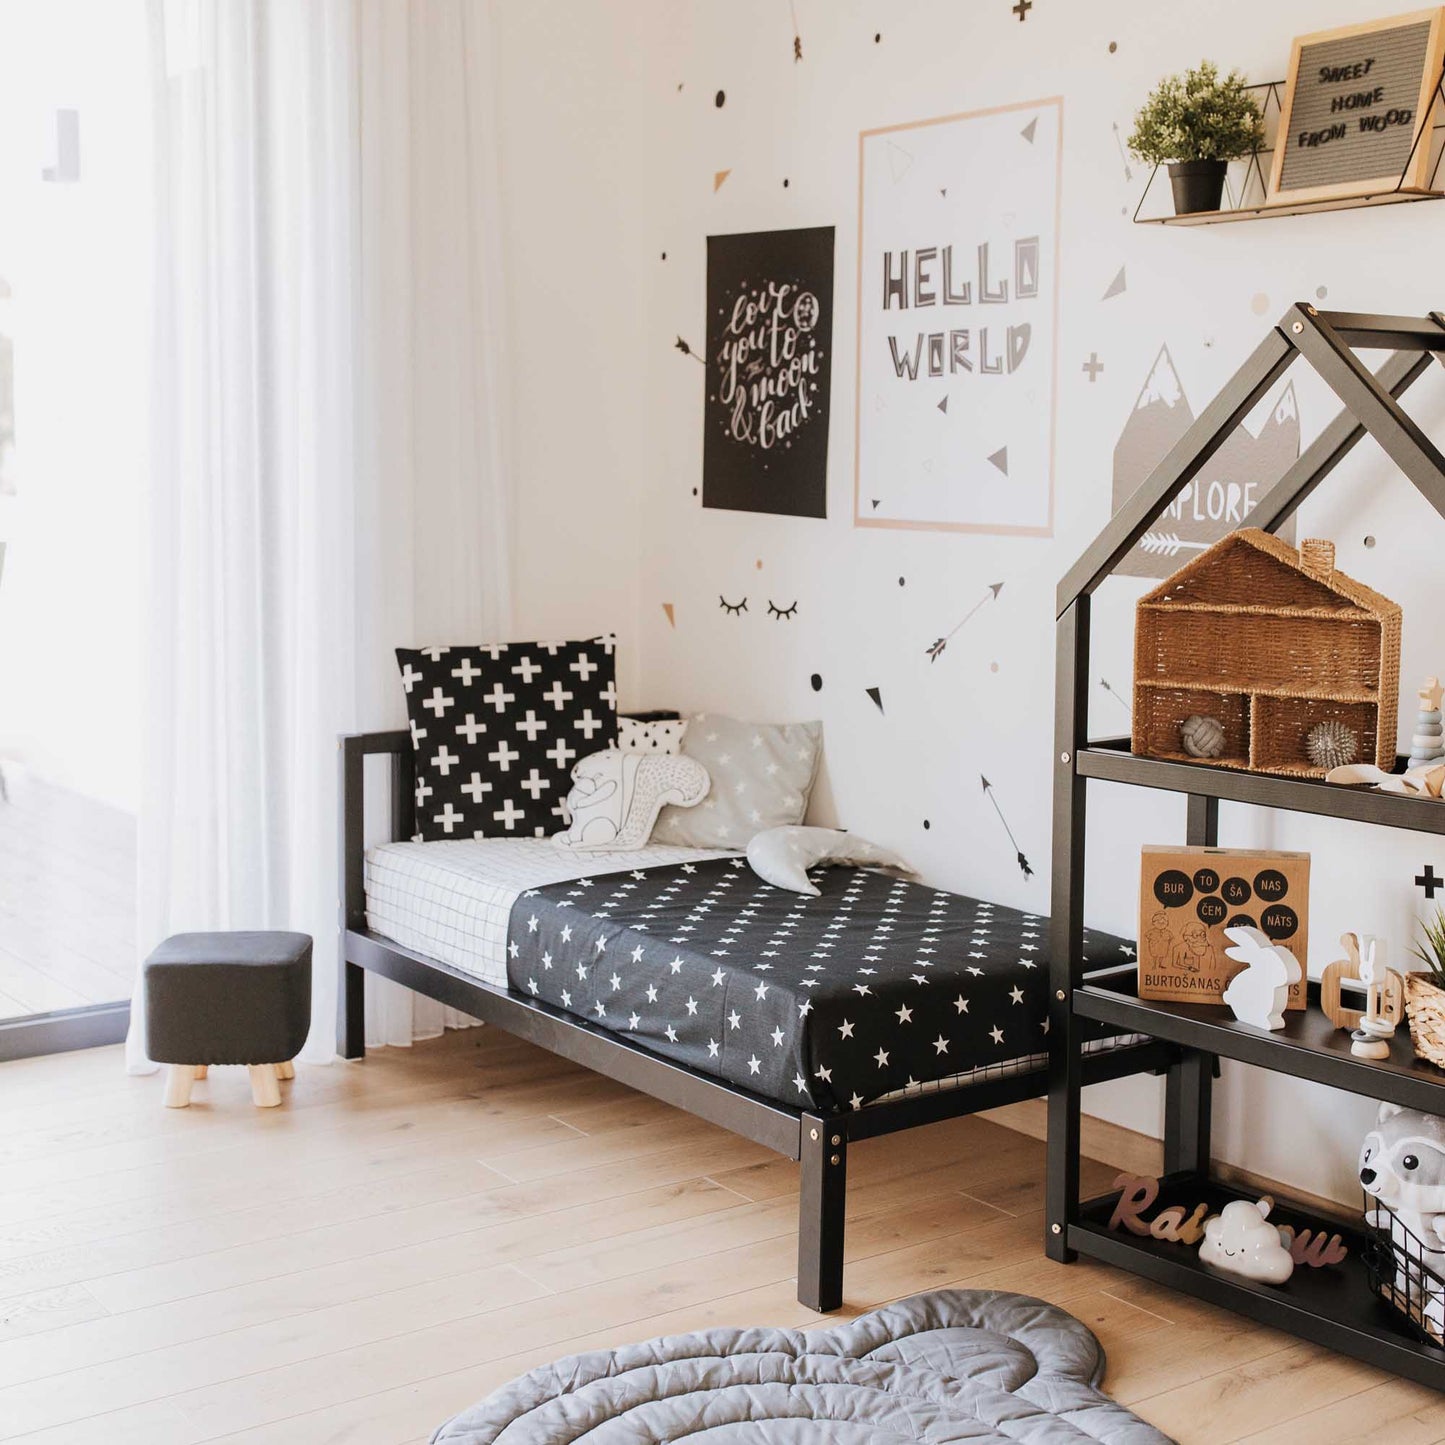 A black and white children's room decorated with polka dots on the walls. The room features a Sweet Home From Wood kids' bed on legs with a headboard, promoting independence in a Montessori-inspired environment.